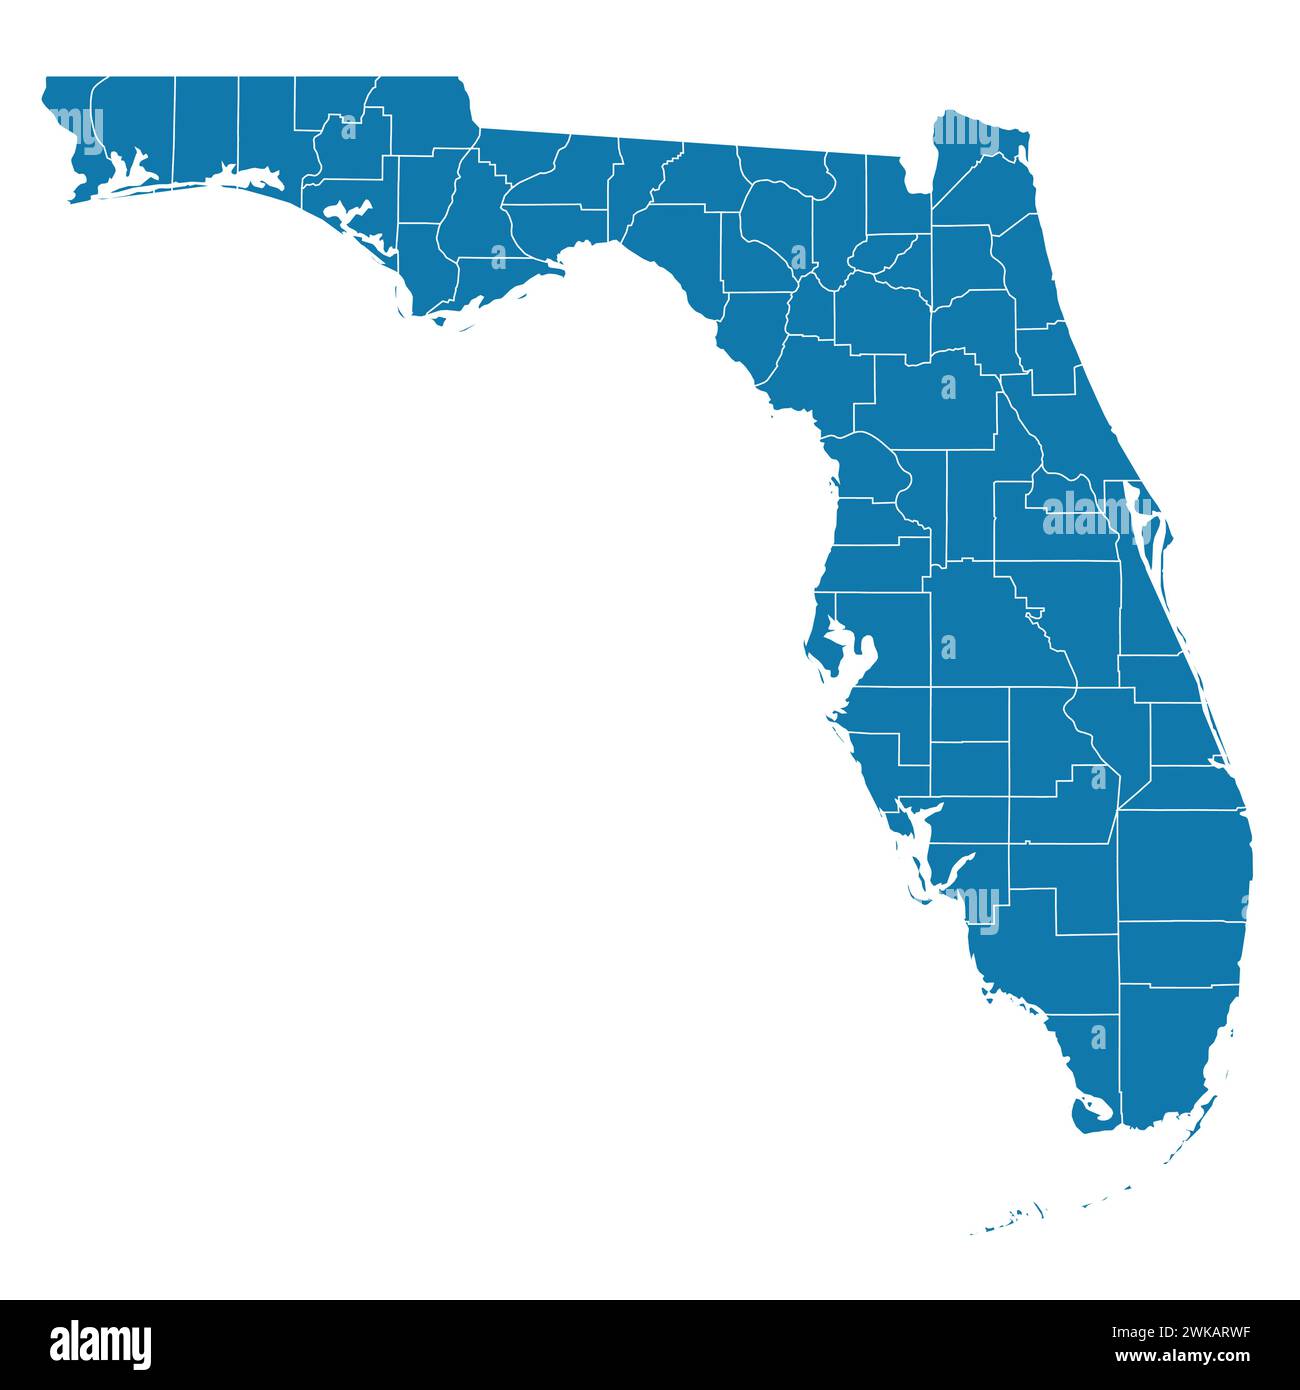 Editable vector file of the state of Florida with counties included. Stock Vector